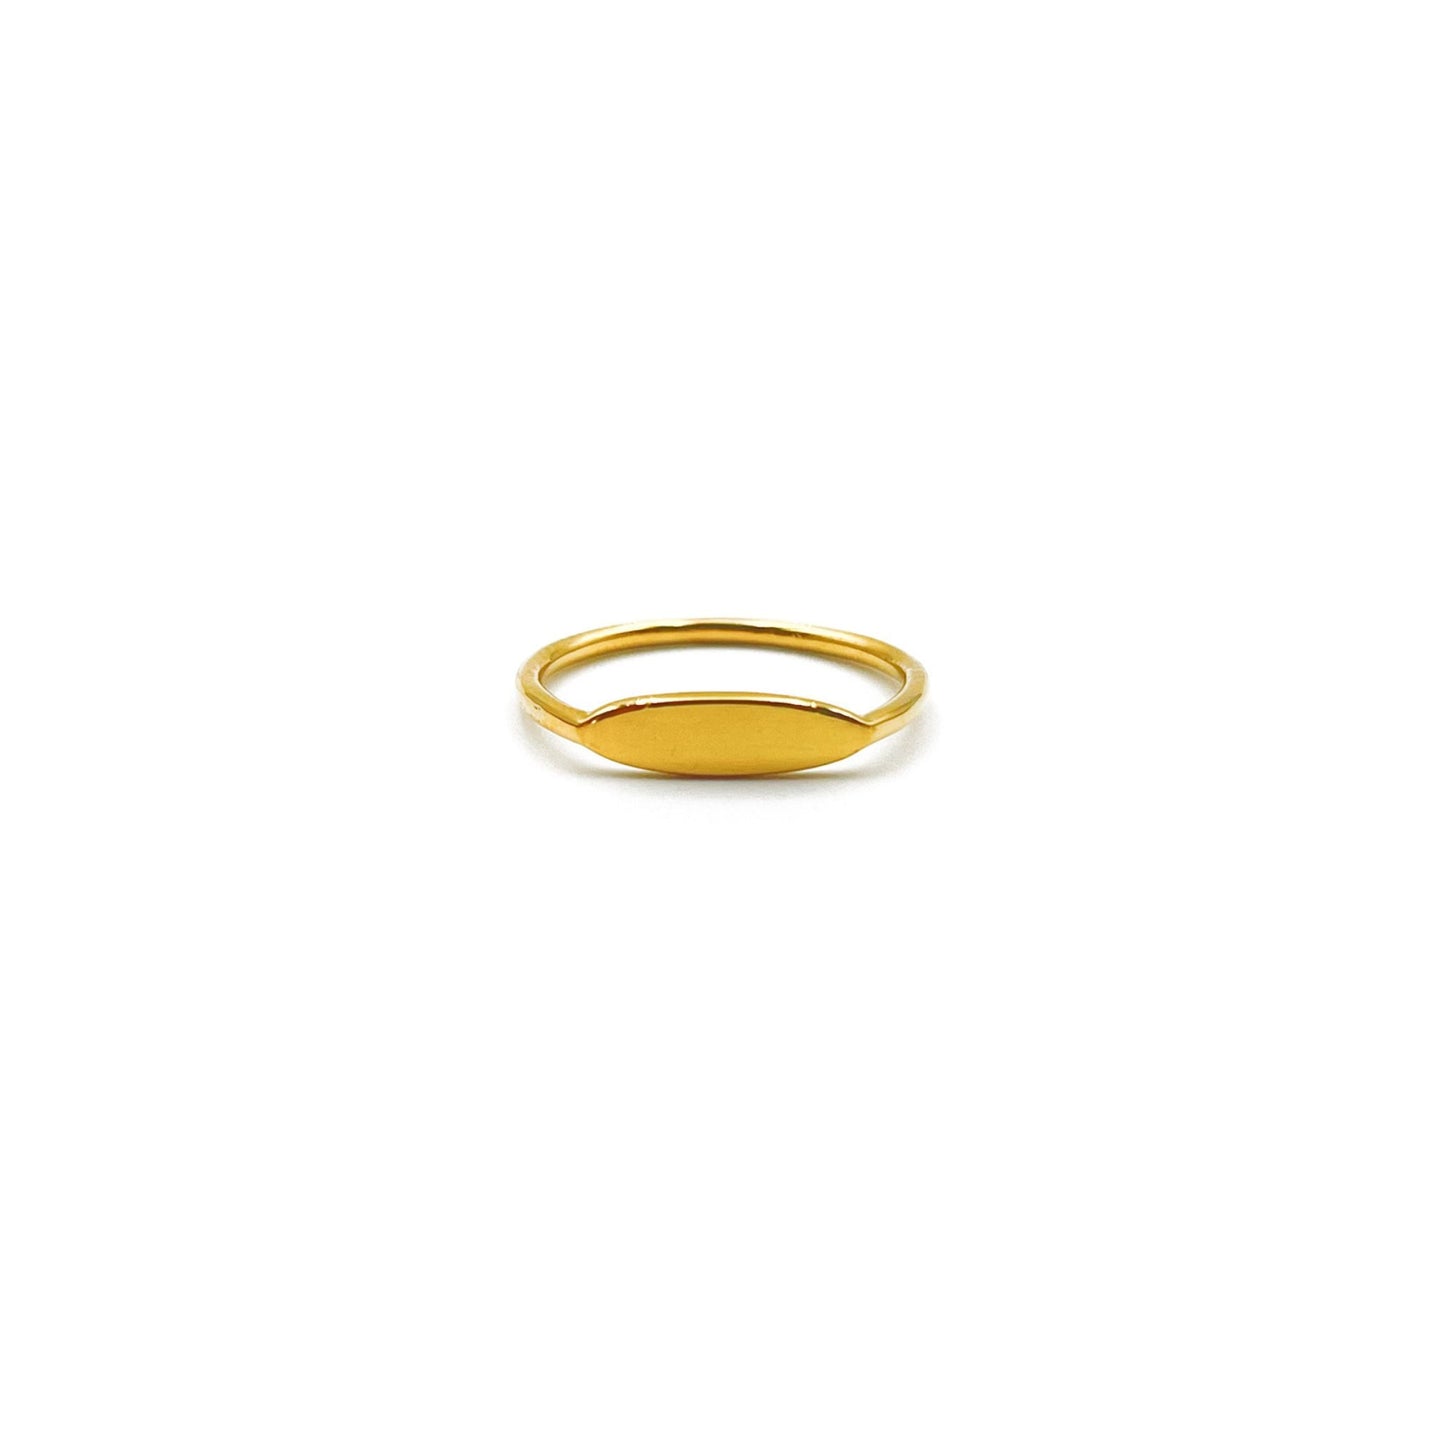 Shop 9ct gold personalized signet ring South Africa